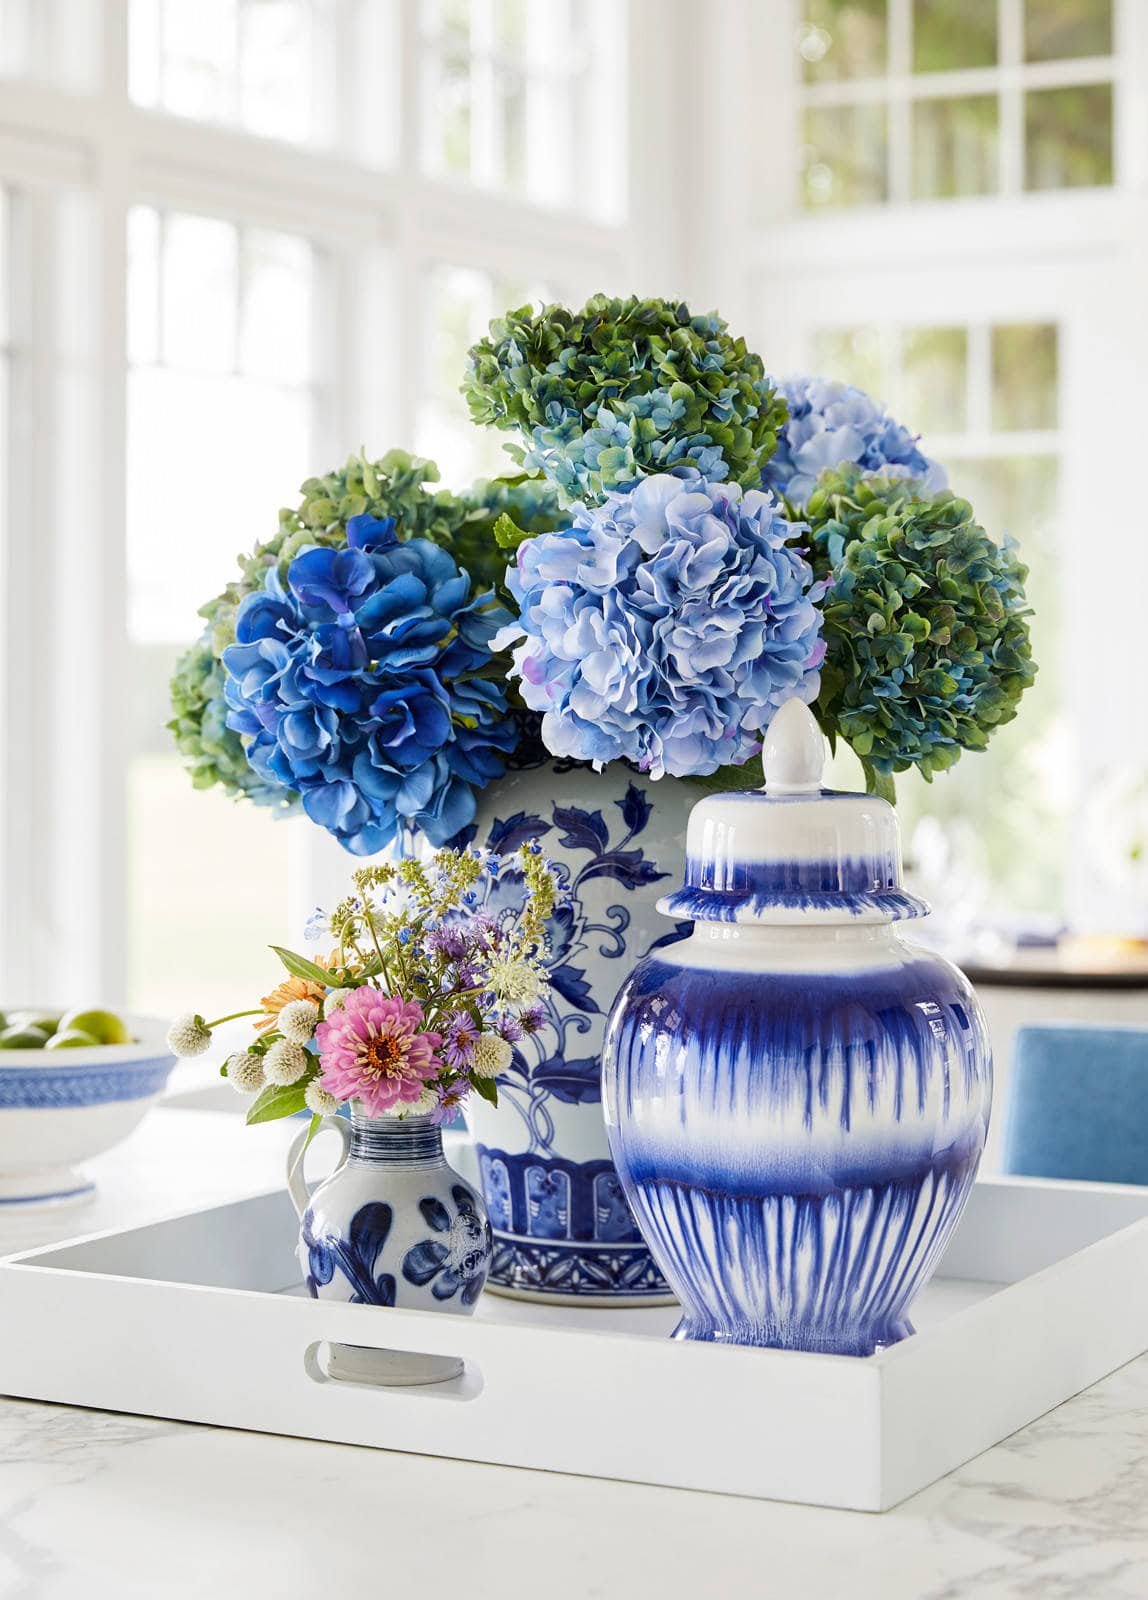 vases in white and blue chinoiserie with floral arrangements